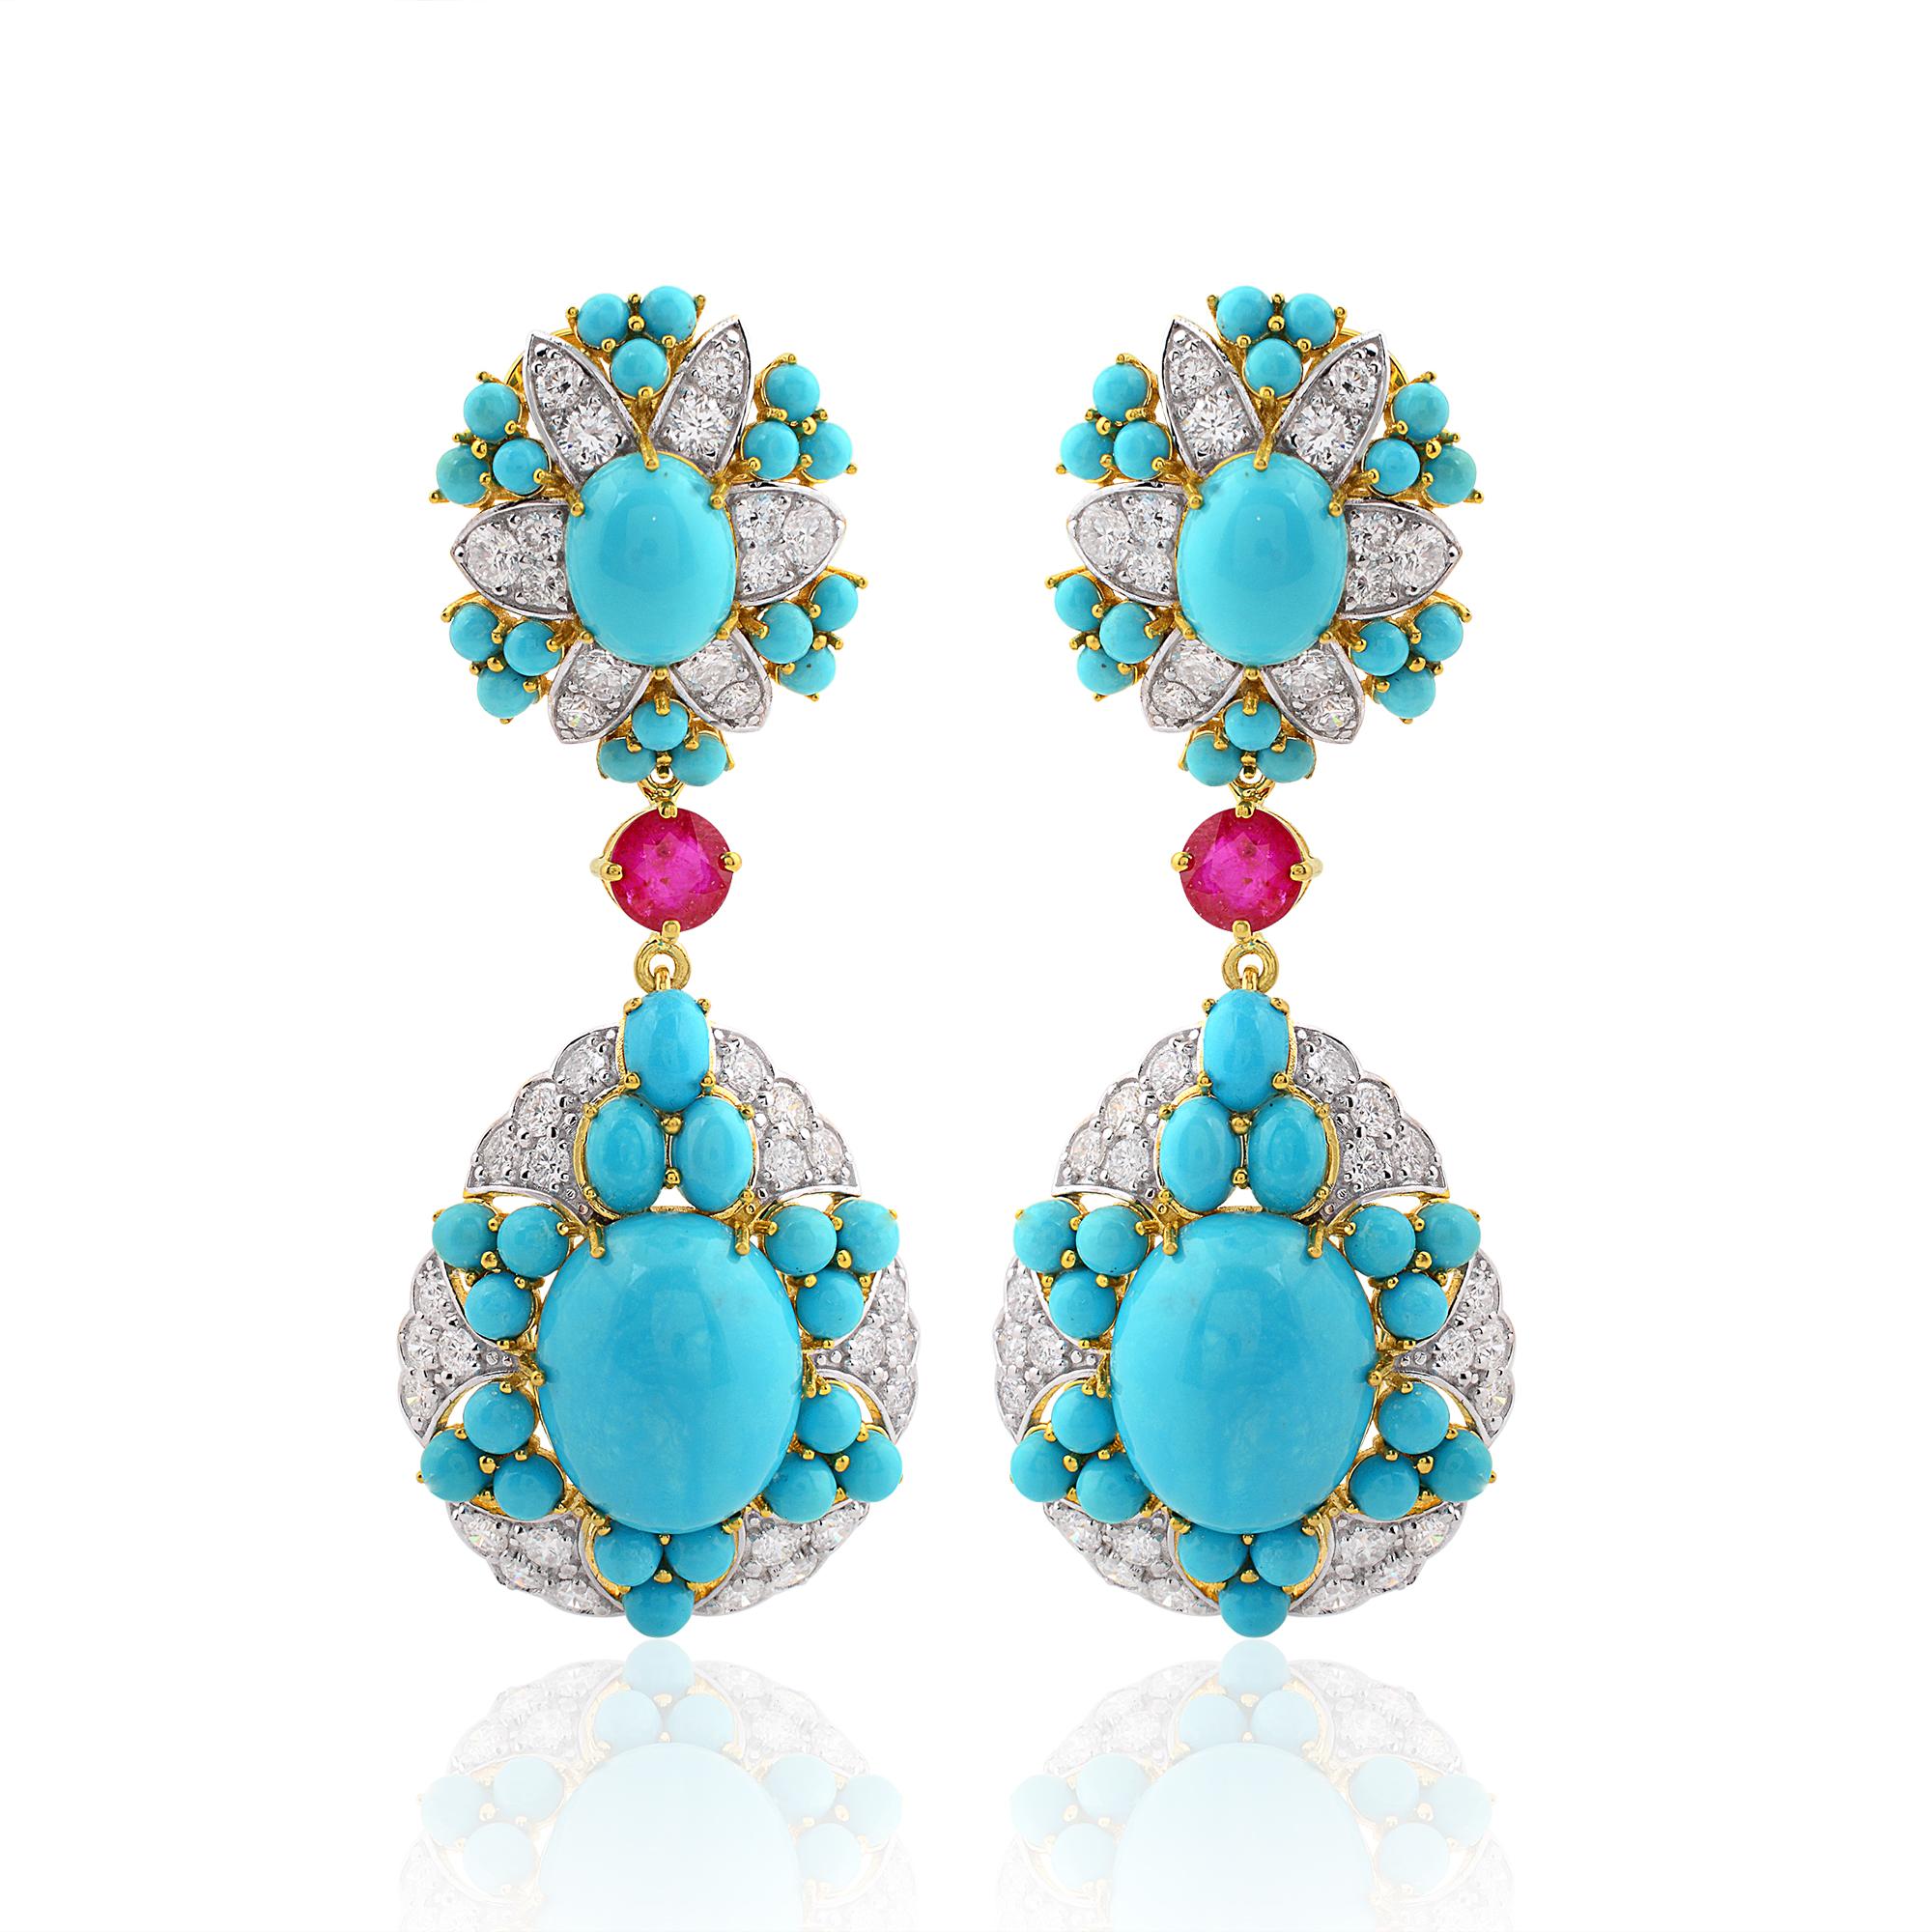 Indulge in the timeless elegance of these exquisite Arizona Turquoise Gemstone Dangle Earrings, adorned with radiant Rubies and Diamonds, set in luxurious 18 Karat Yellow Gold. Crafted with meticulous attention to detail, these earrings are a true